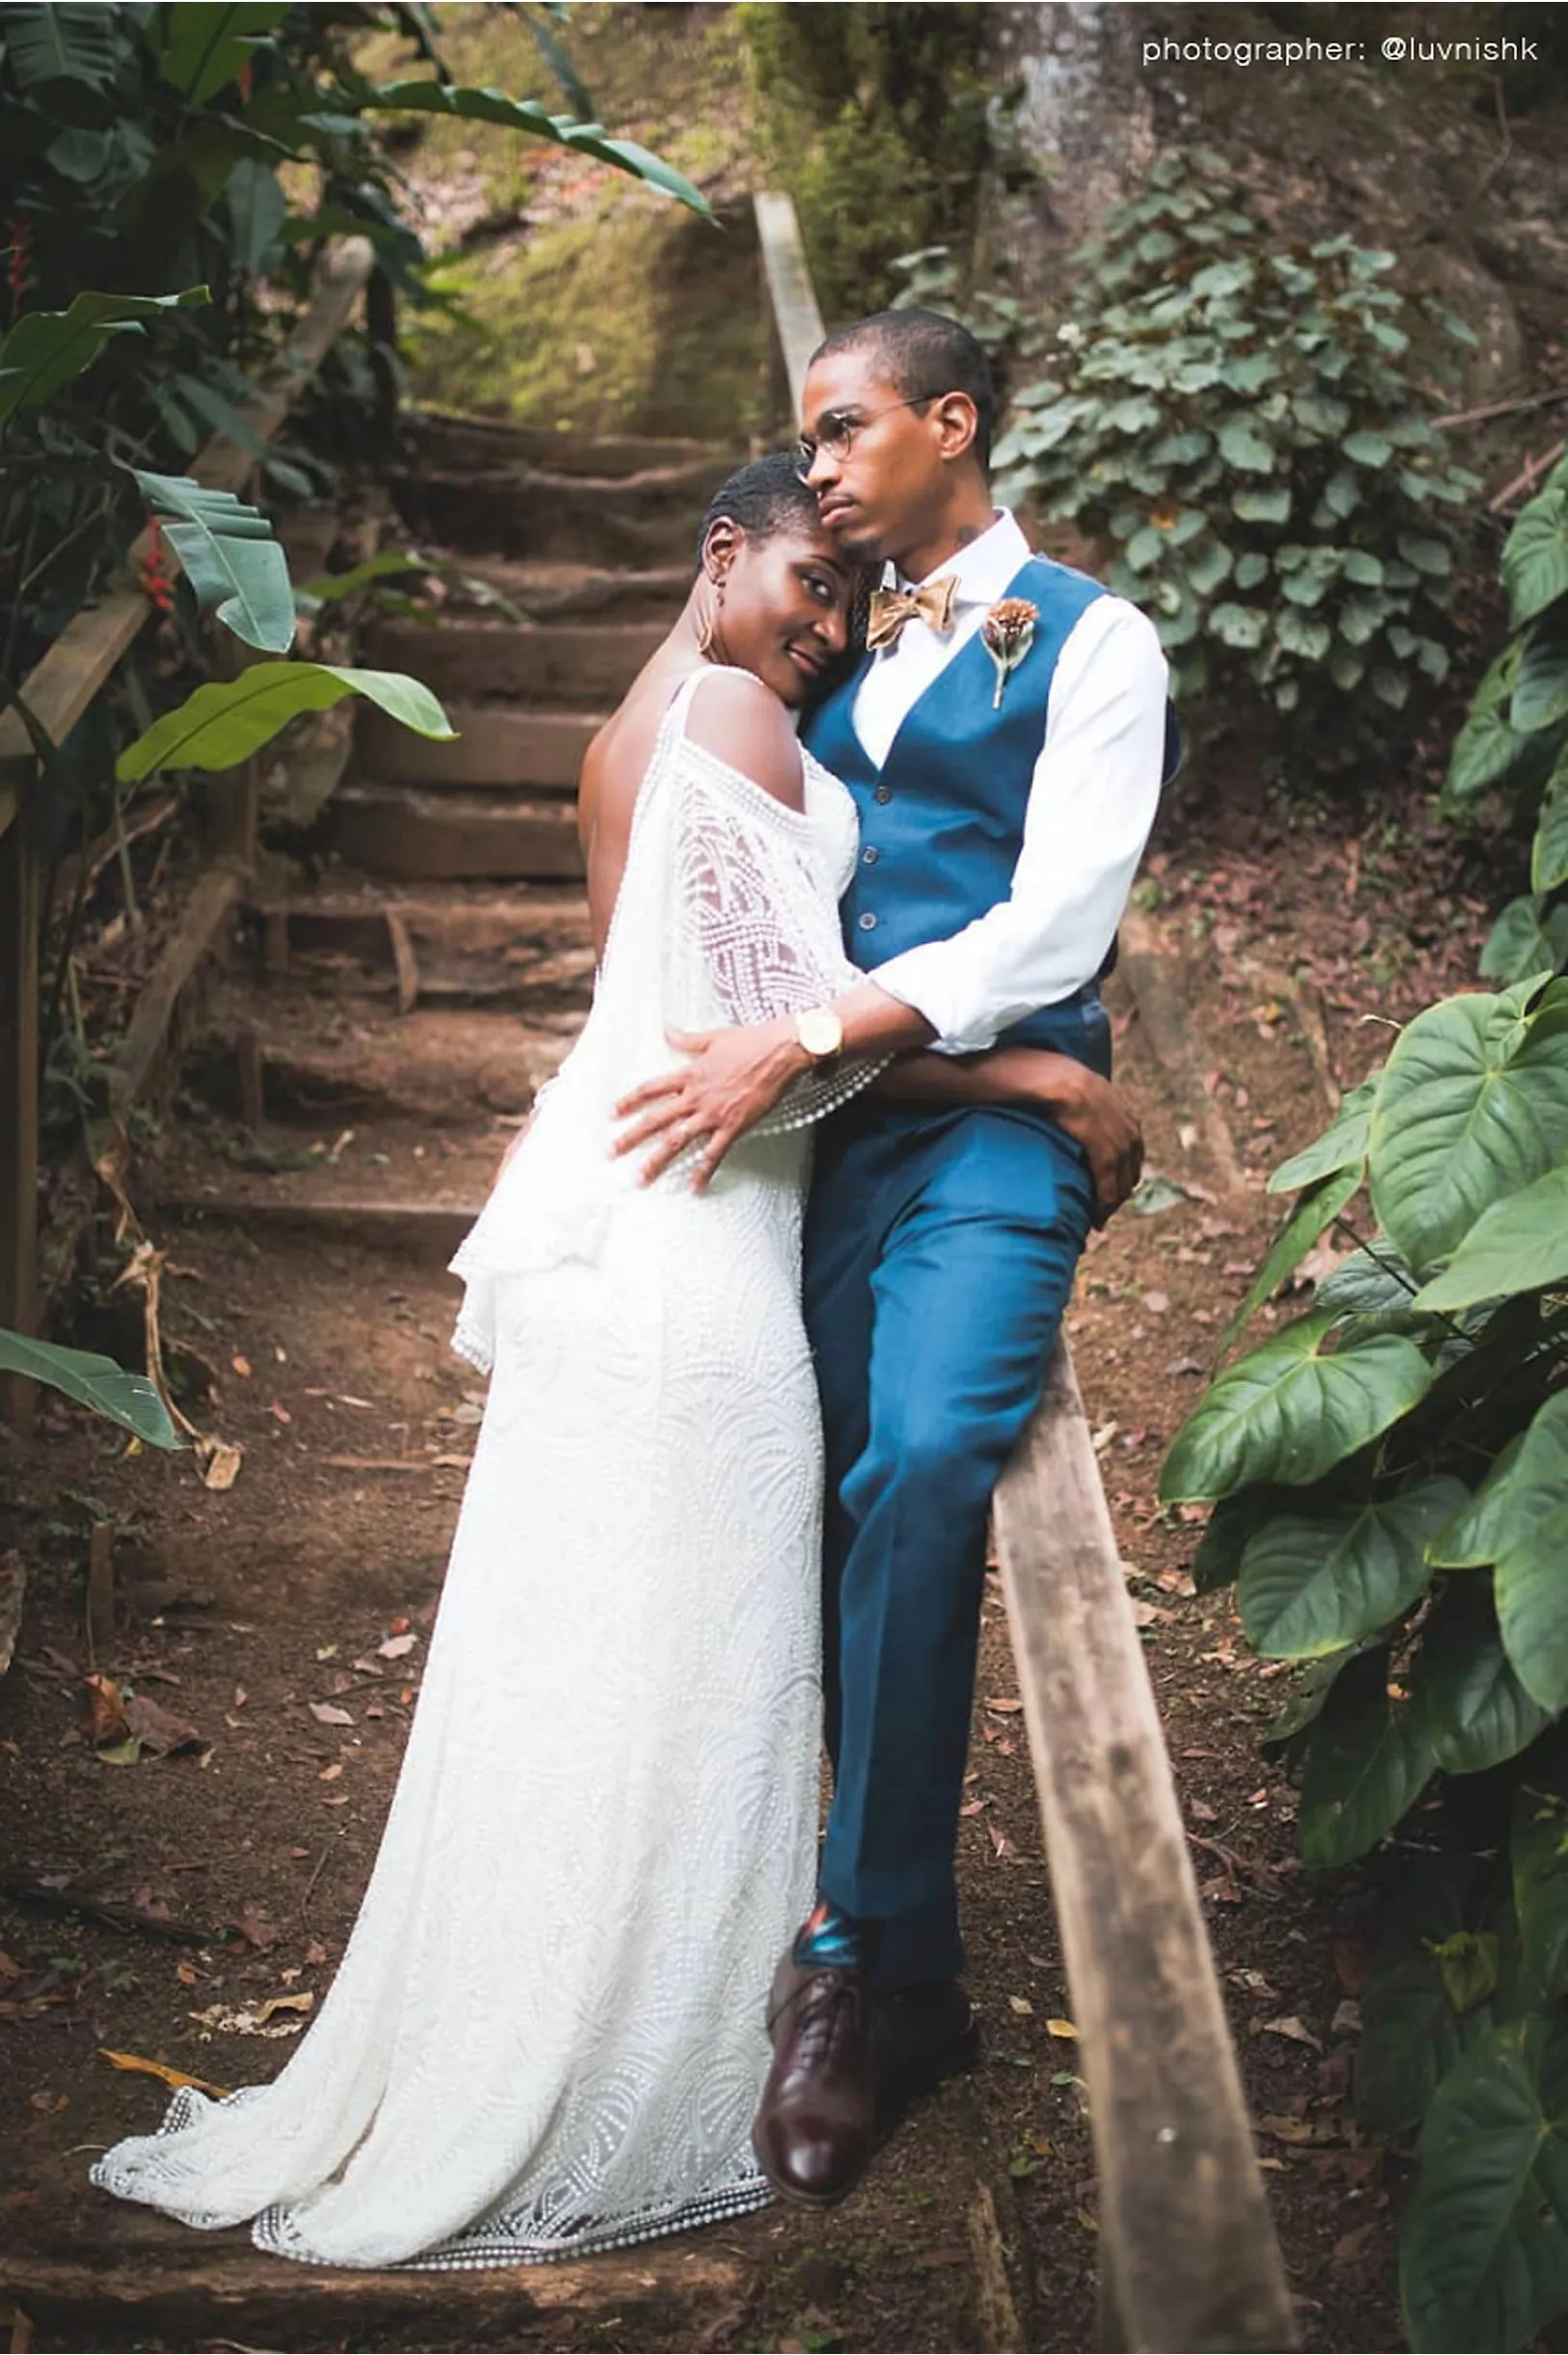 Wedding Dress toppers similar to BHLDN? Does anyone know if there are any  other places to get lace wedding dress toppers other than BHLDN? I'm  looking for something similar to the Sydnee